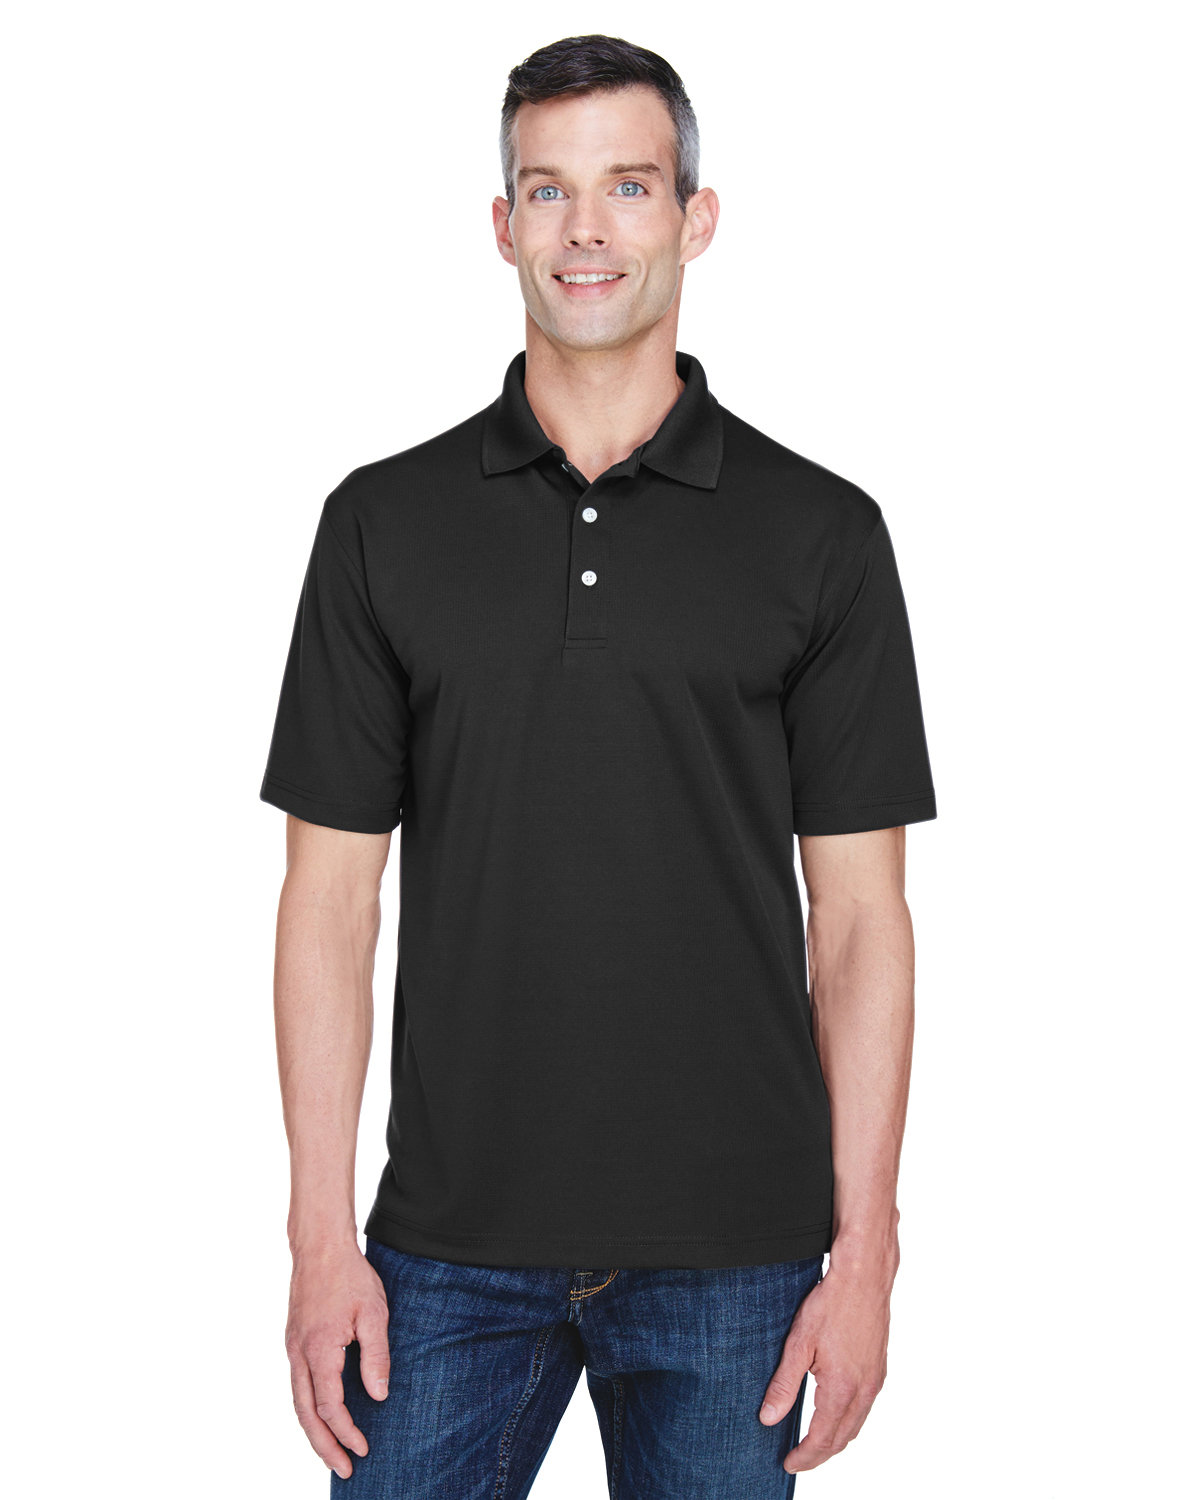 Men's Cool & Stain-Release Performance Polo | alphabroder